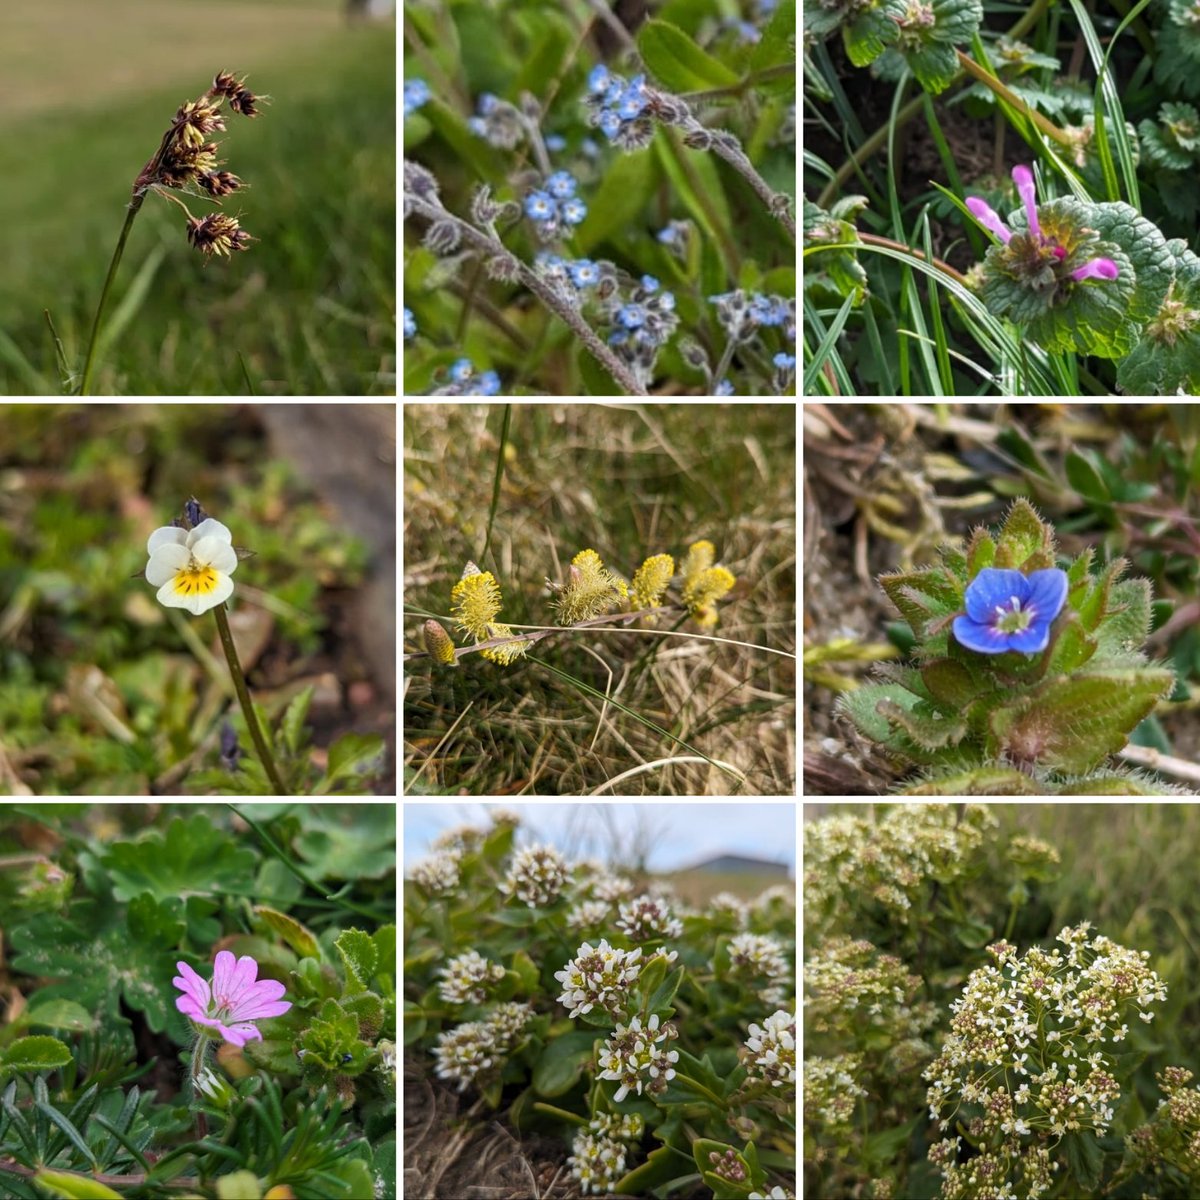 A wee montage #wildflowerhour montage from the coast this week 📸 Field Wood-rush, Early Forget-me-not, Henbit, Field Pansy, Creeping Willow, Wall Speedwell, Dove's-foot Crane's-bill, Scurvygrass and Hoary Cress.